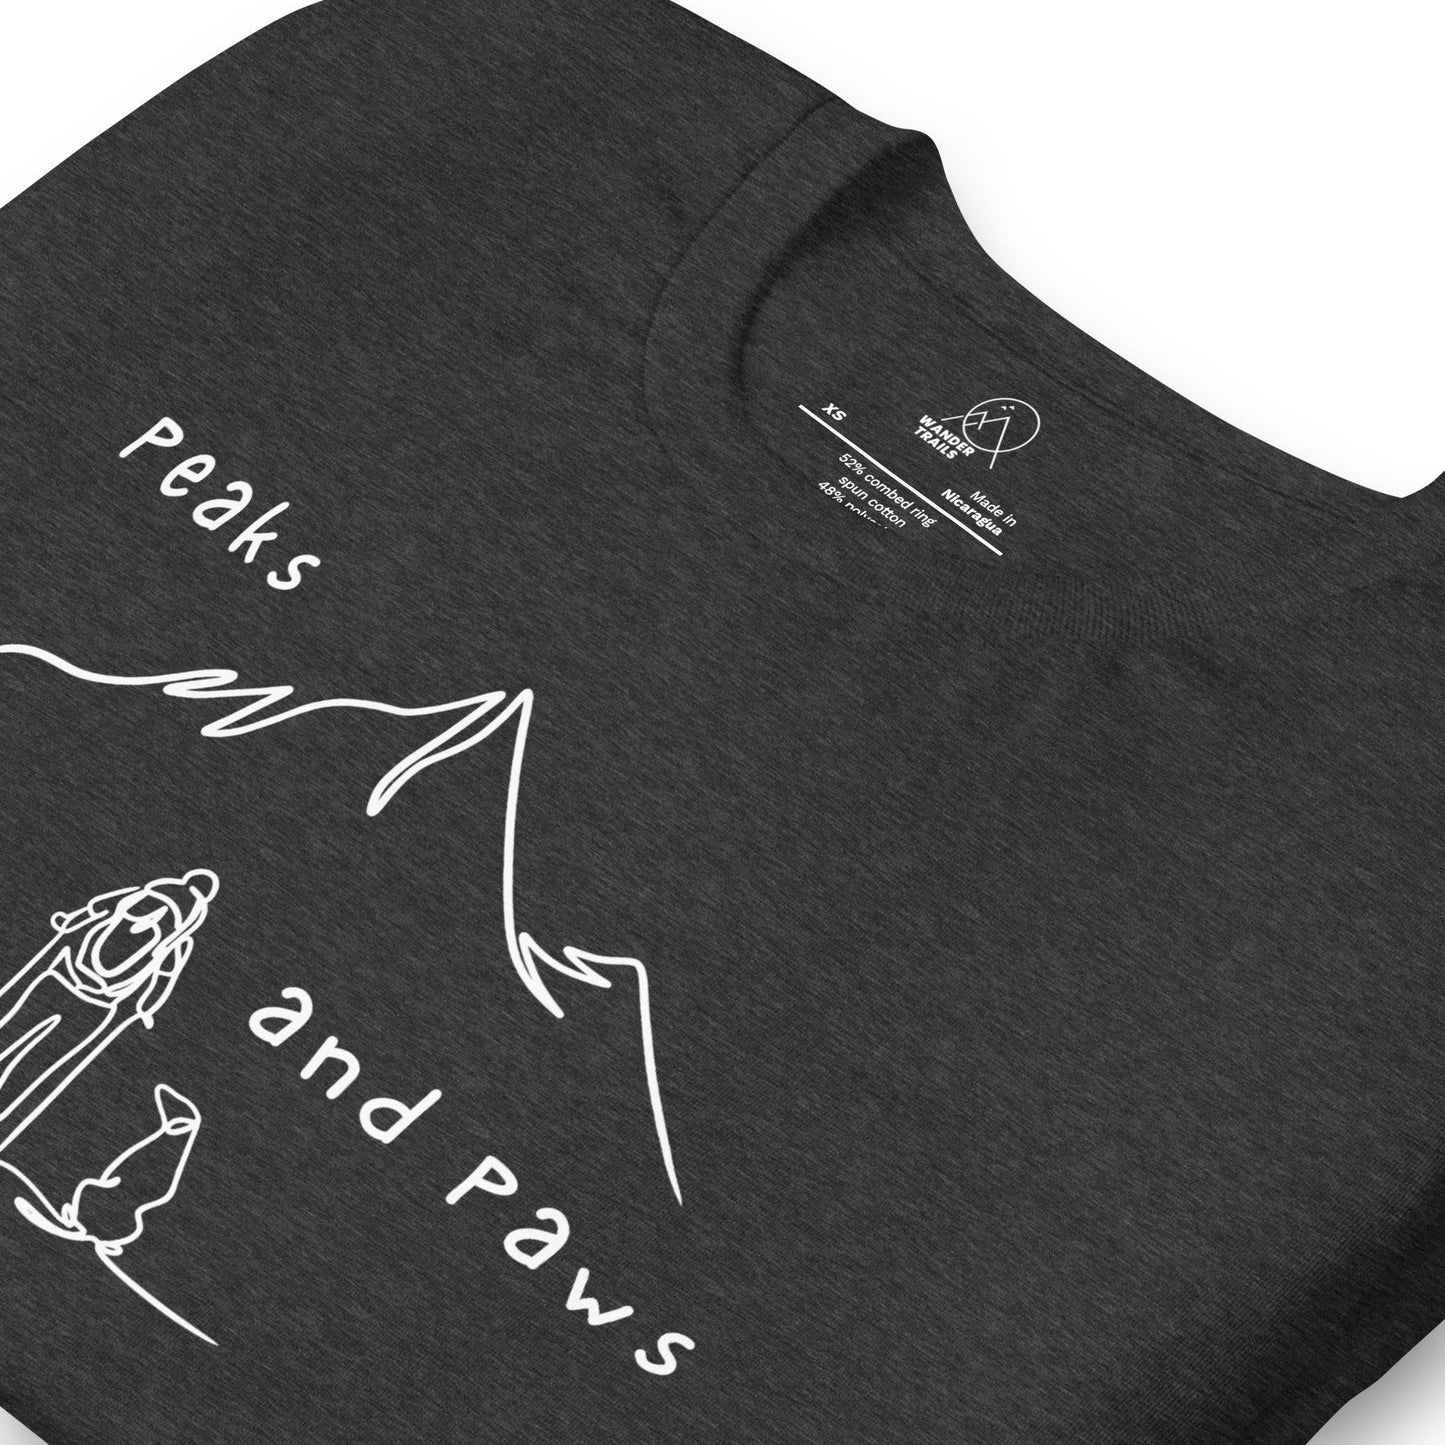 Peaks and Paws Unisex T-shirt